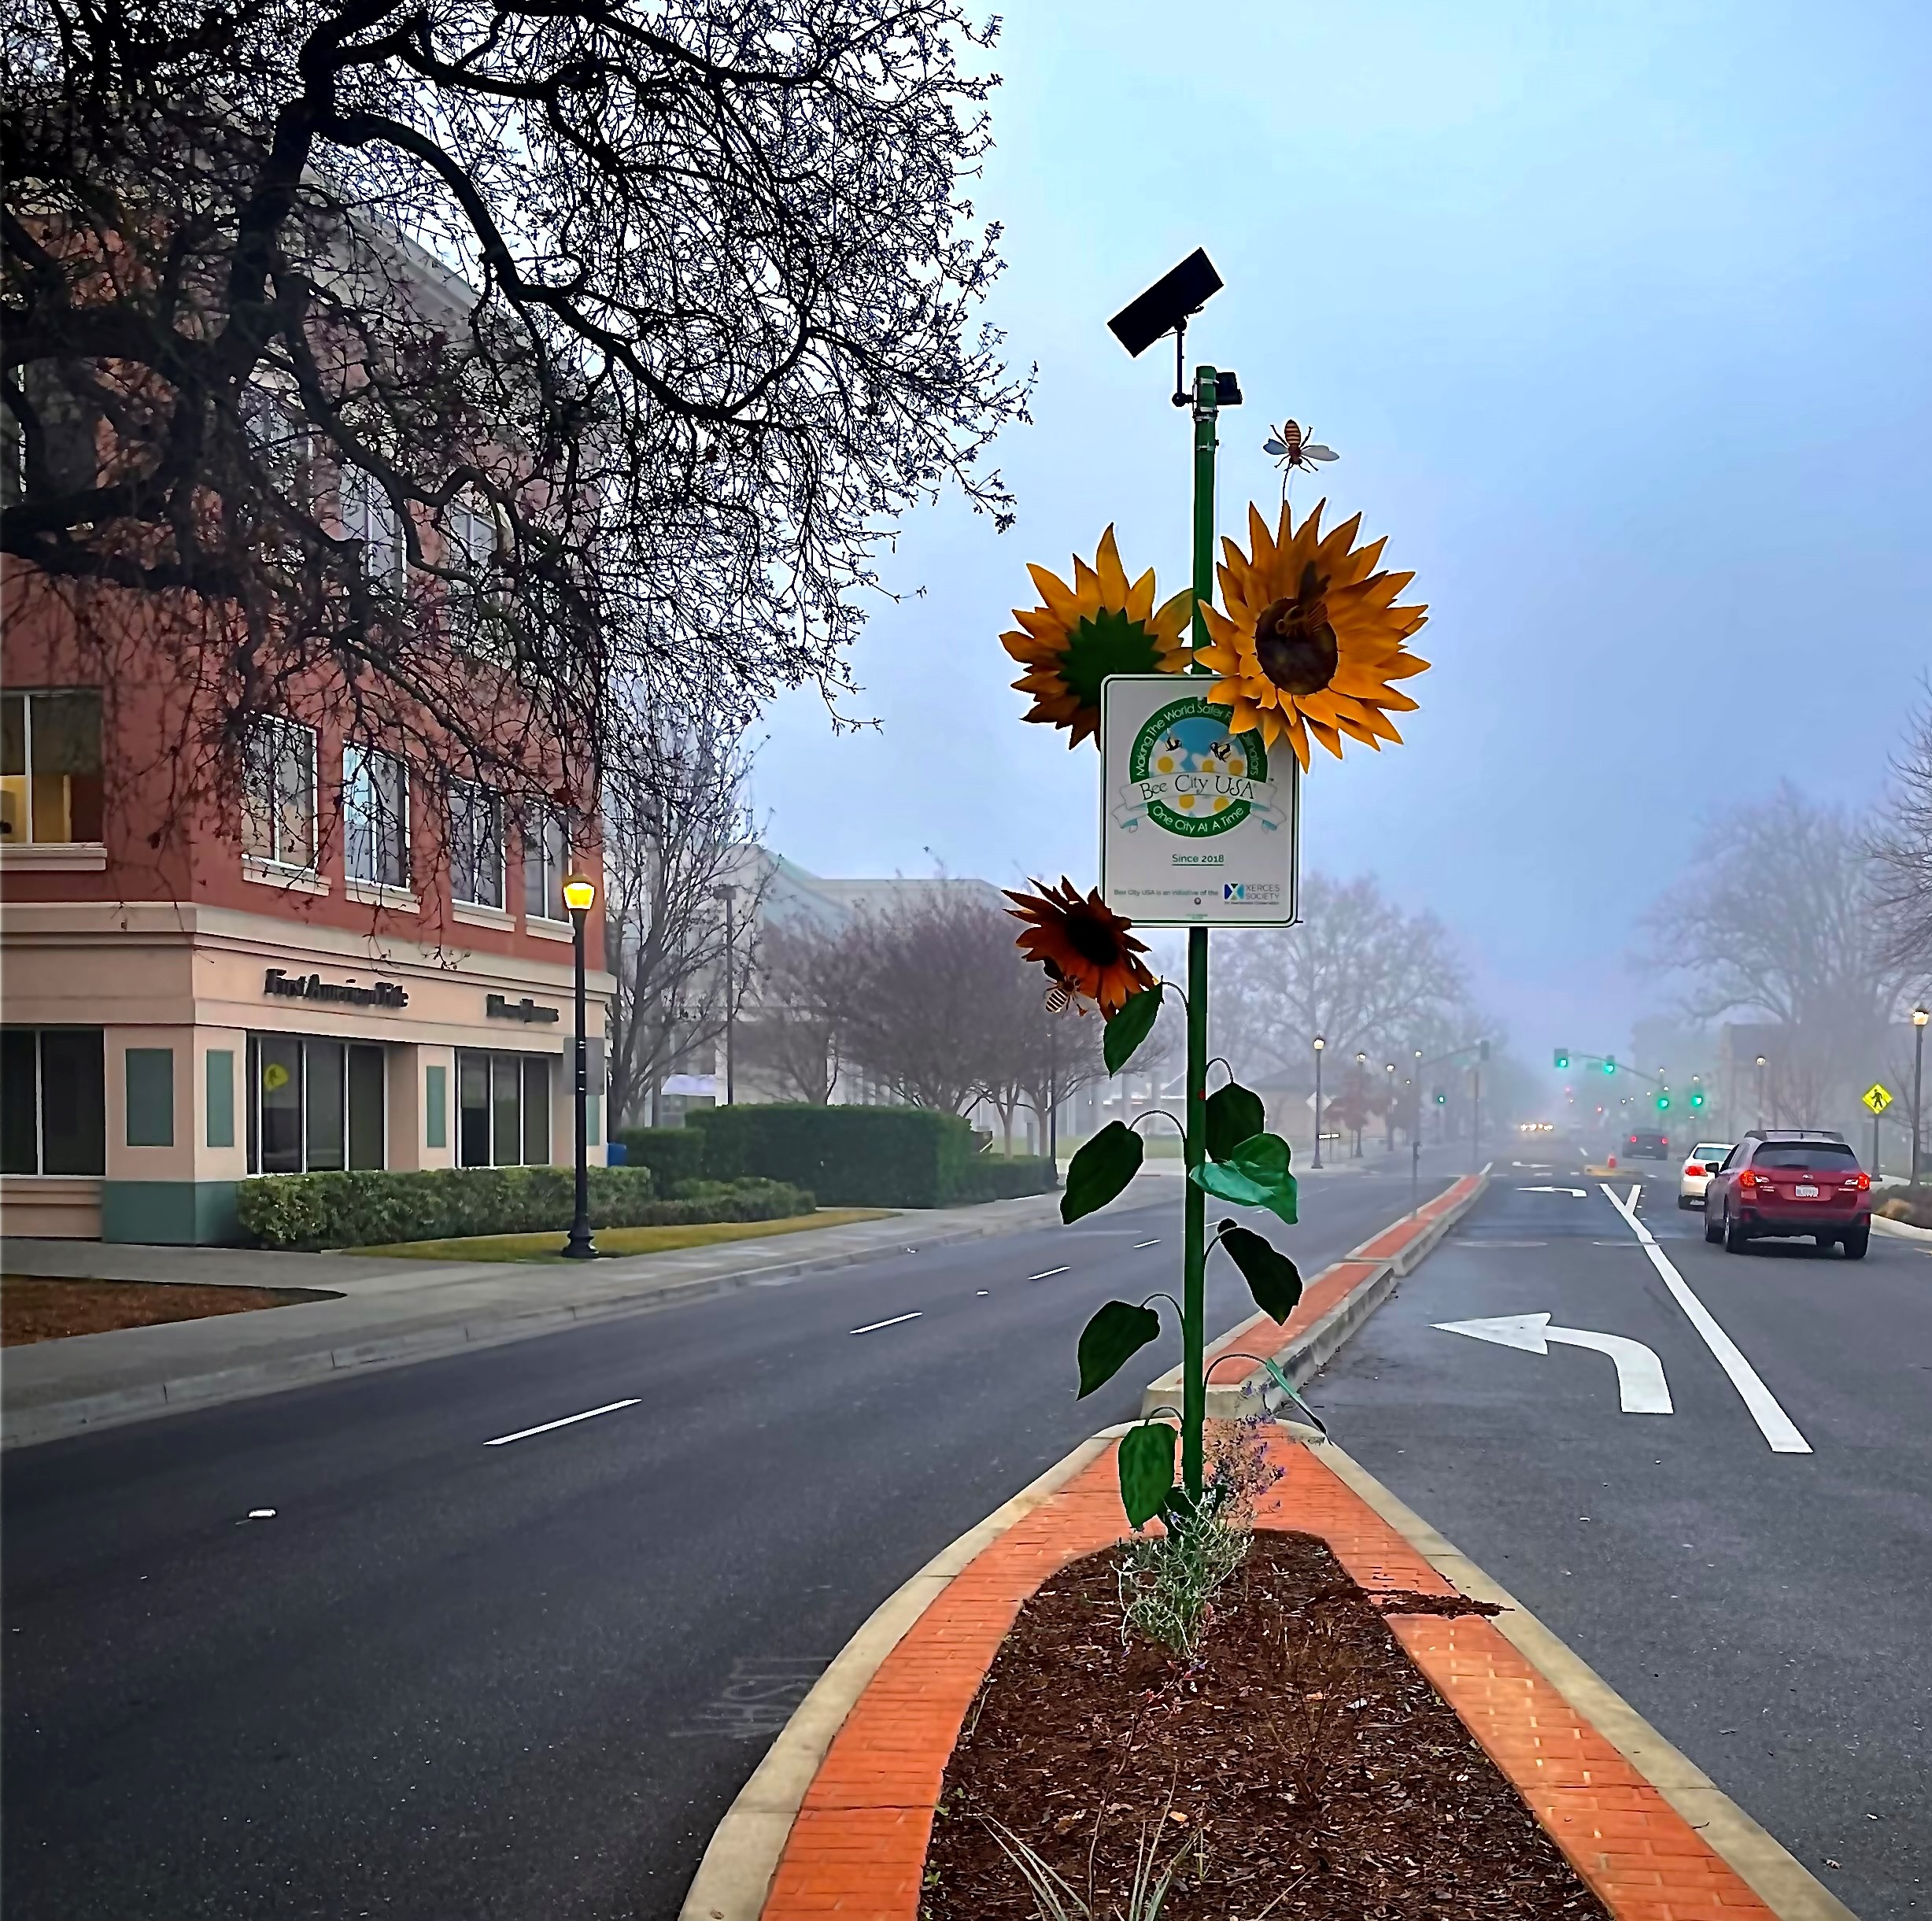 Street sign decorated with sunflowers